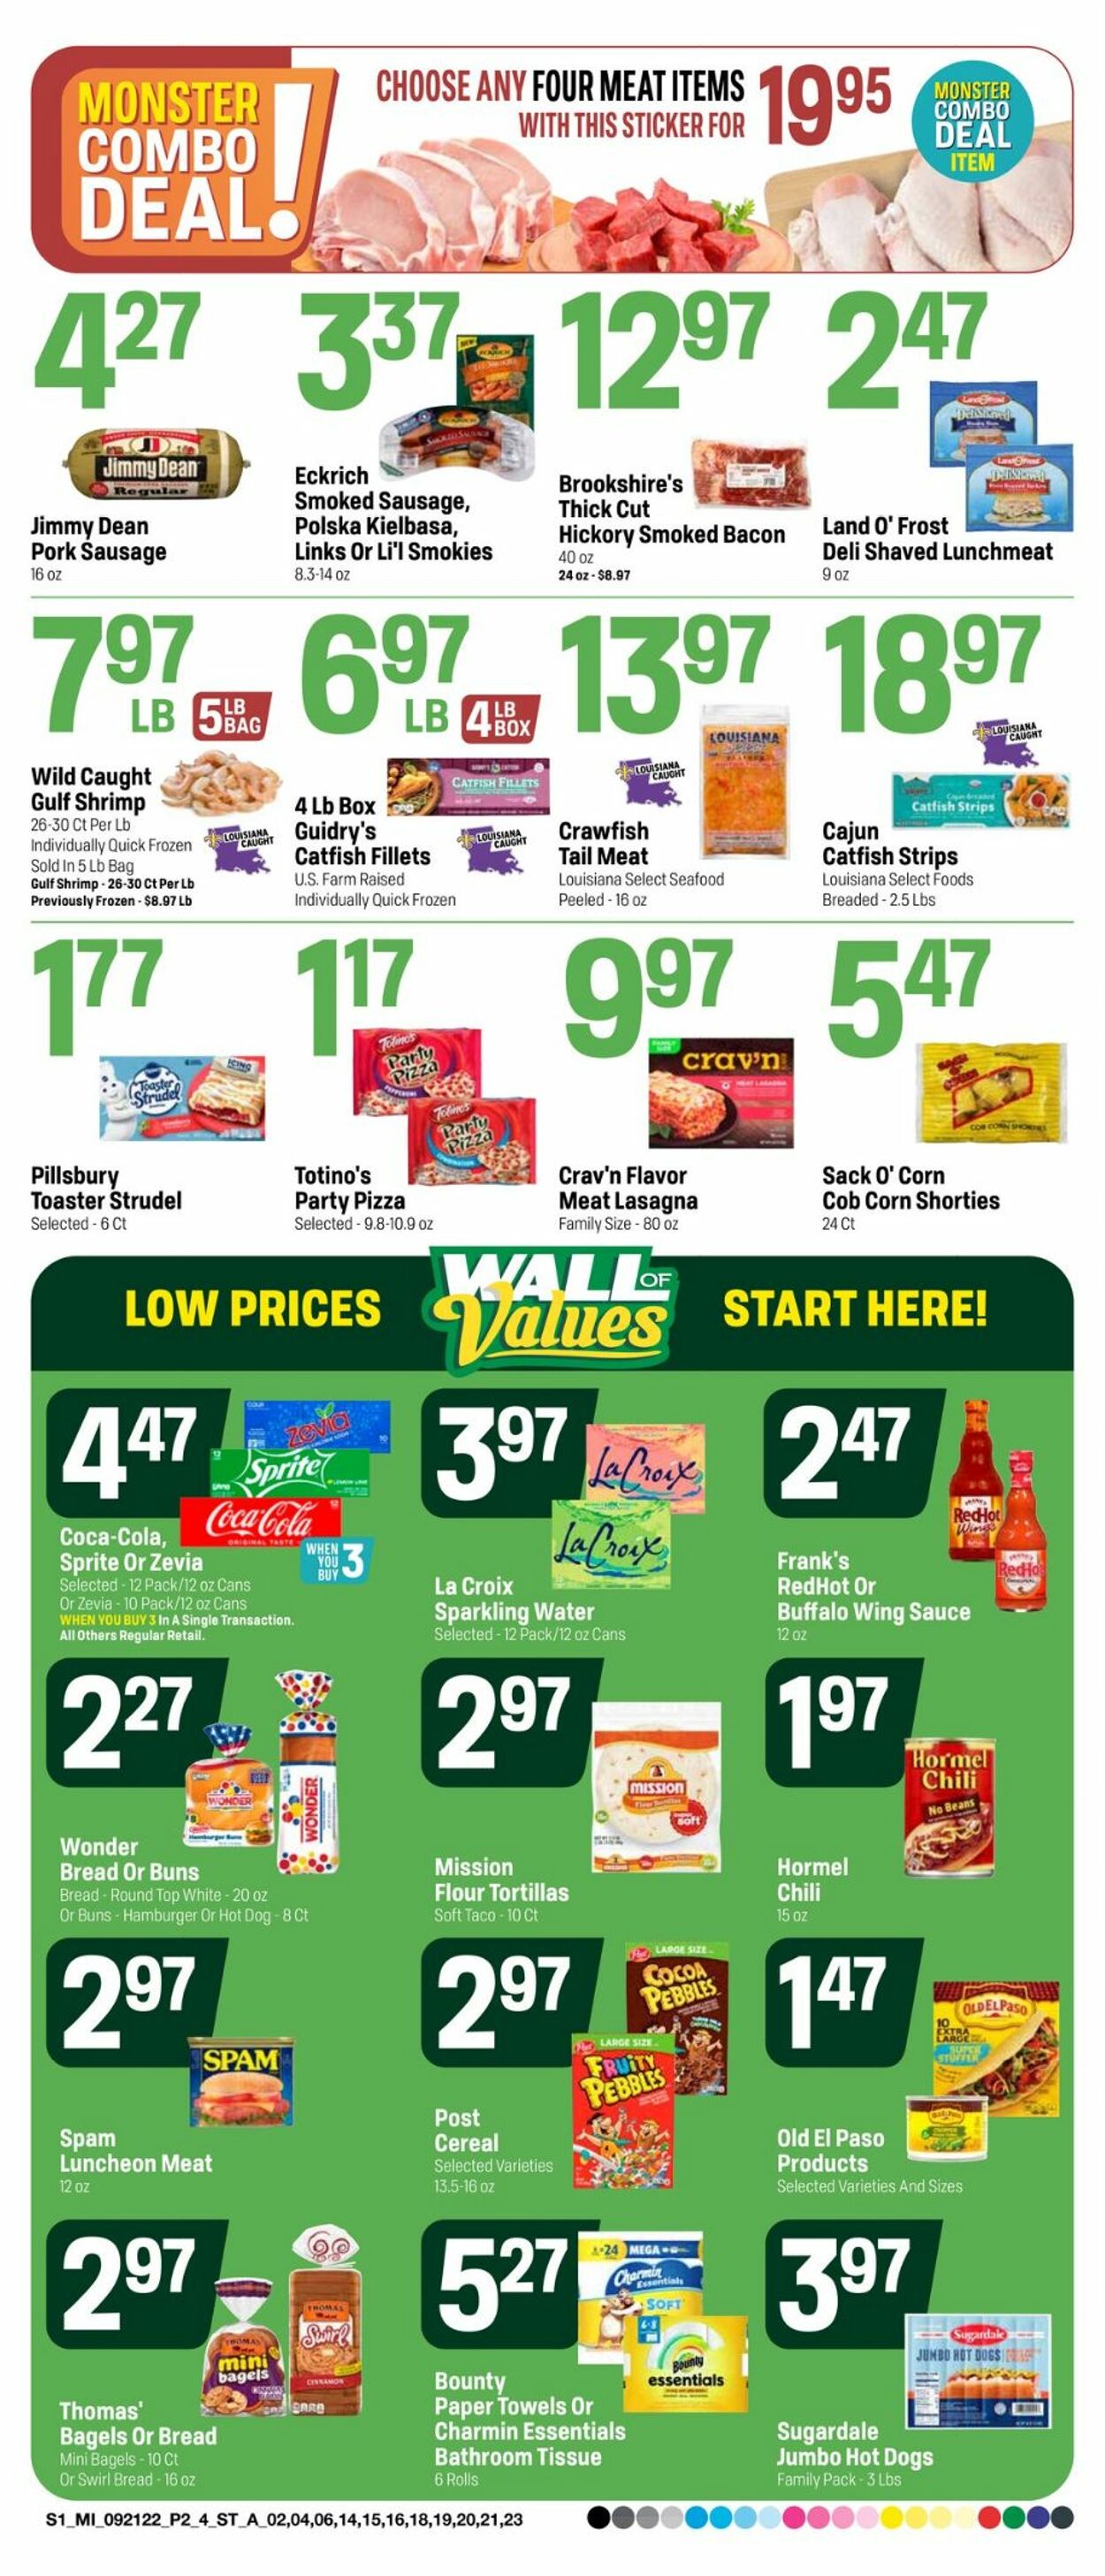 Catalogue Super 1 Foods from 09/21/2022